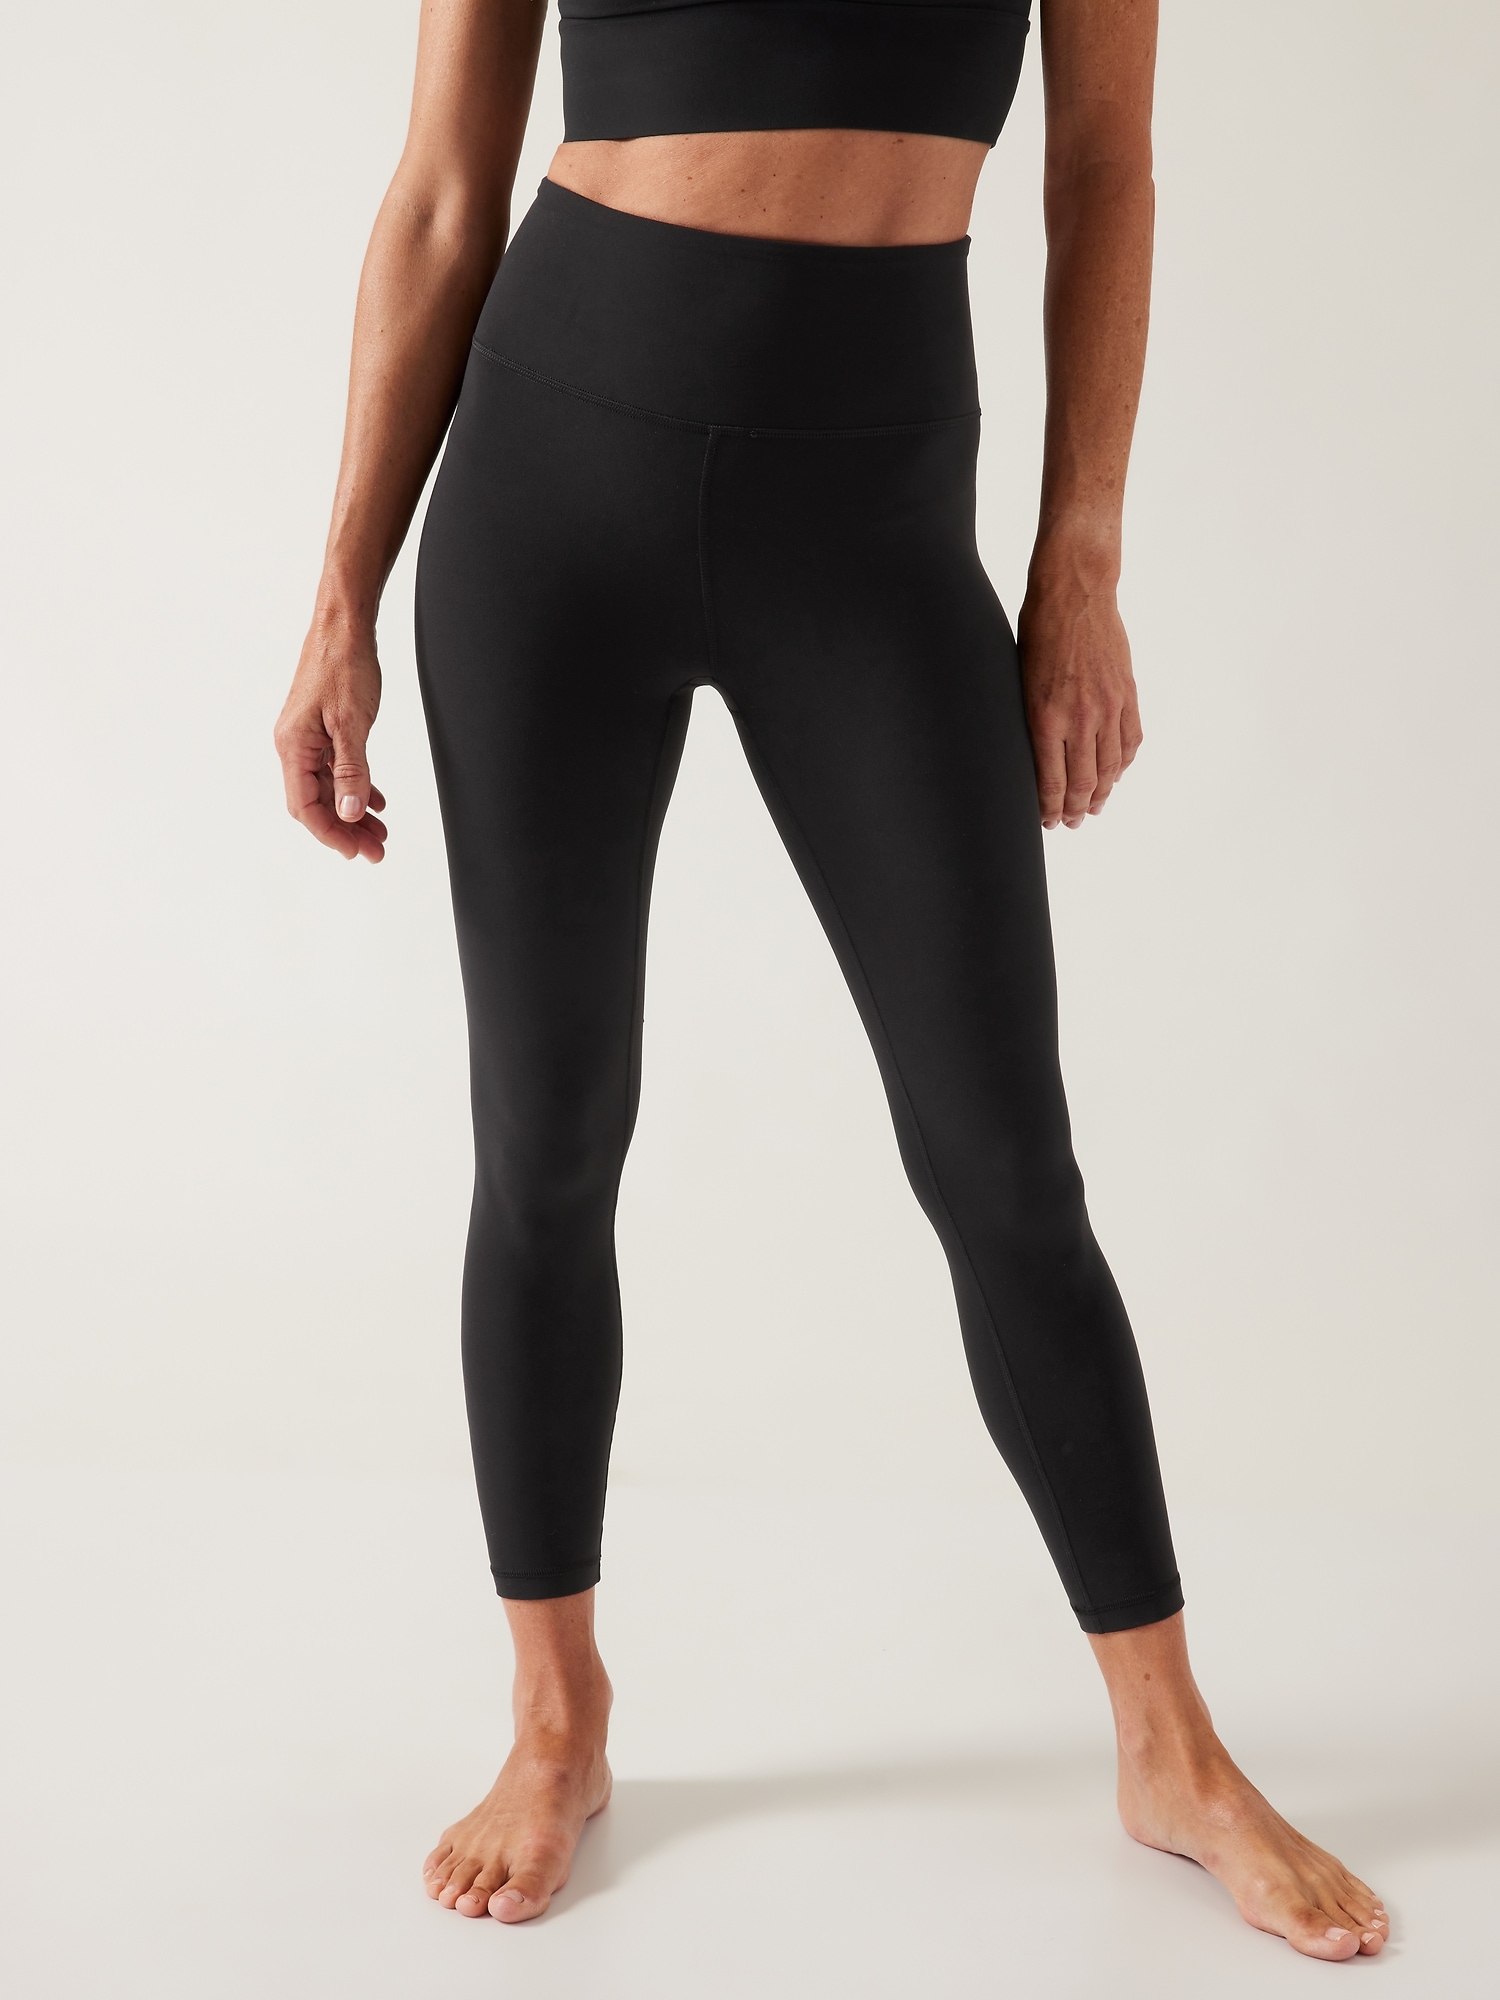 Ultra High Rise Elation 7/8 Tight - leggings for workout